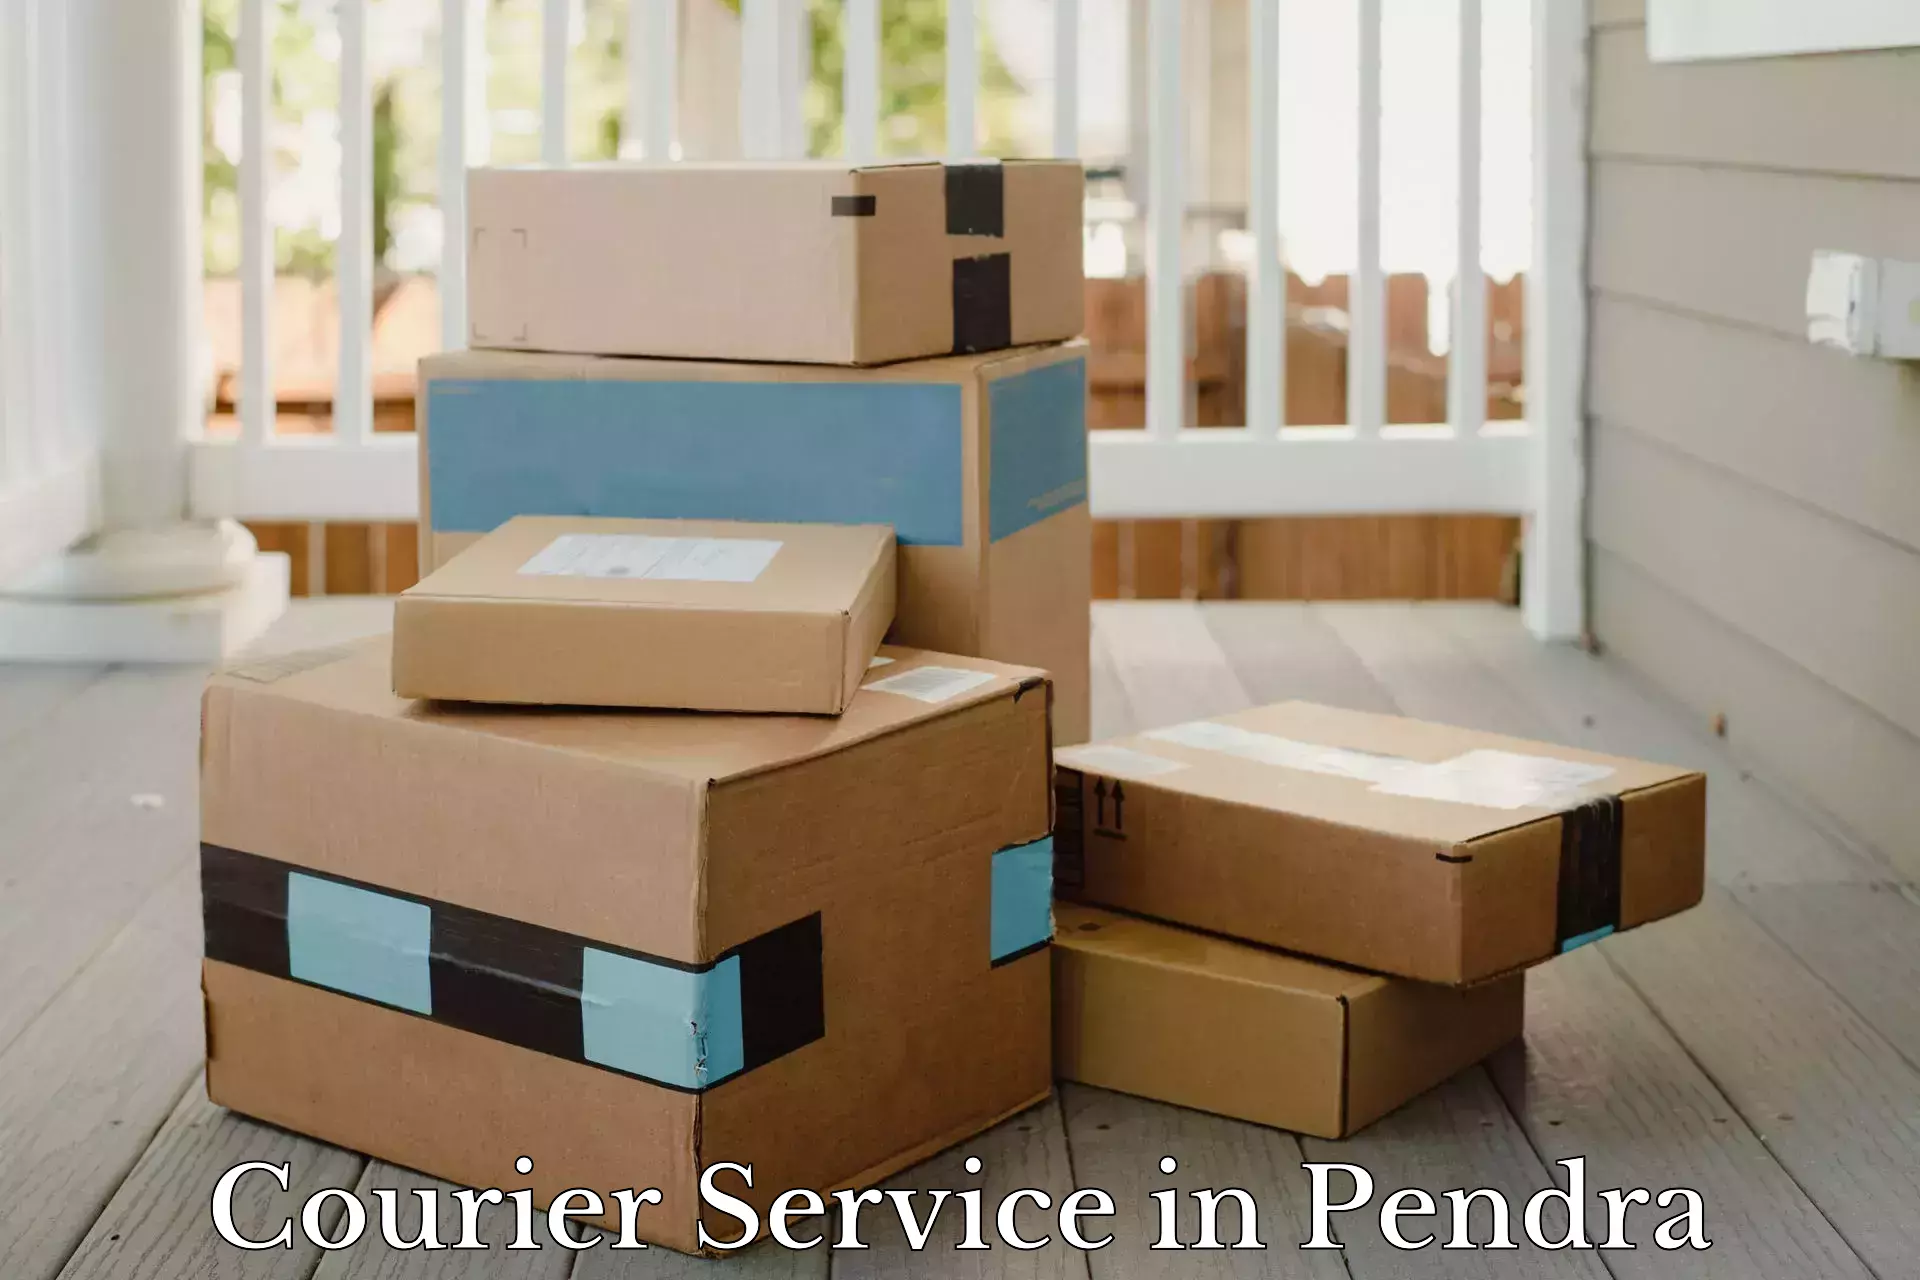 24-hour courier services in Pendra